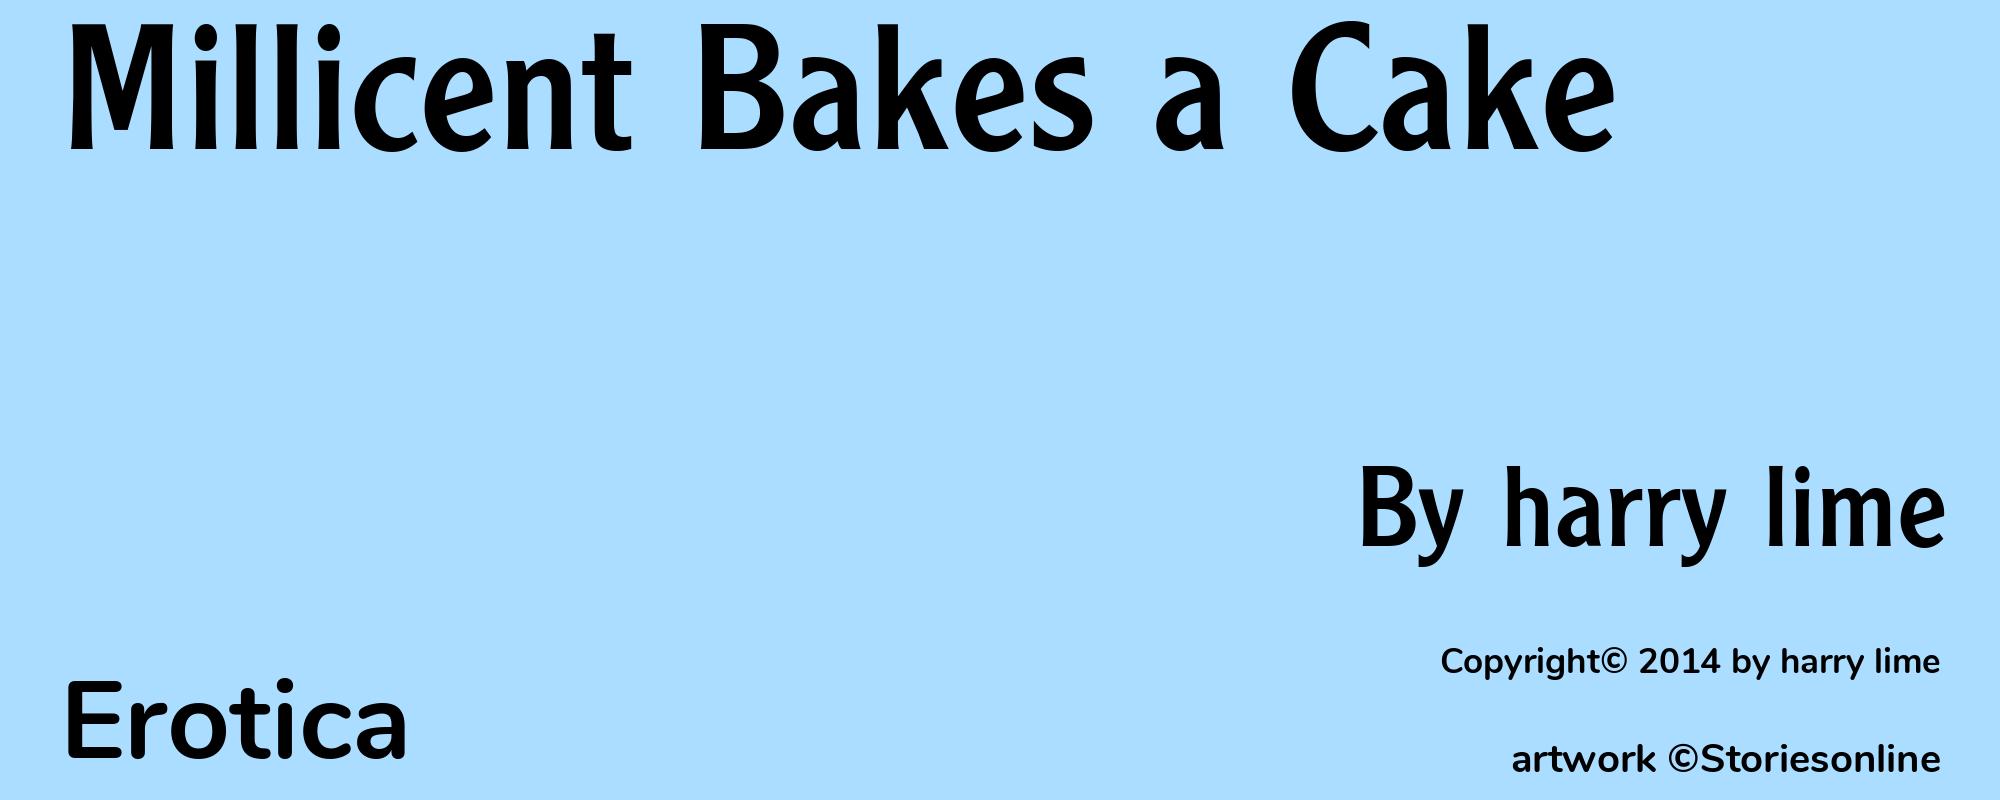 Millicent Bakes a Cake - Cover